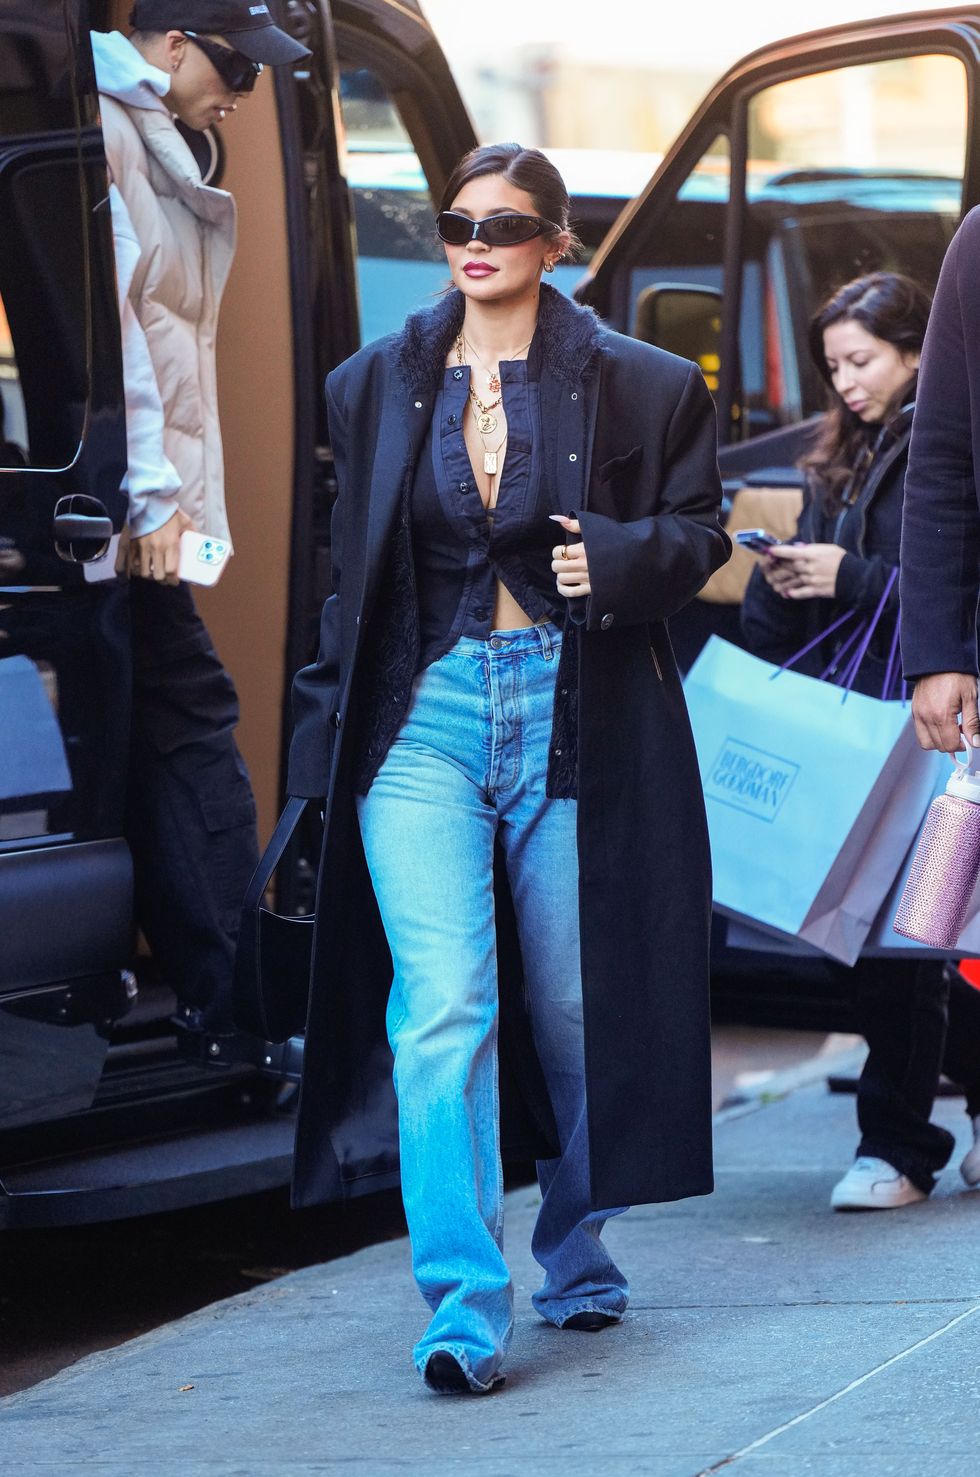 Kylie Jenner Wears Micro Mini Dress and Black Coat in NYC